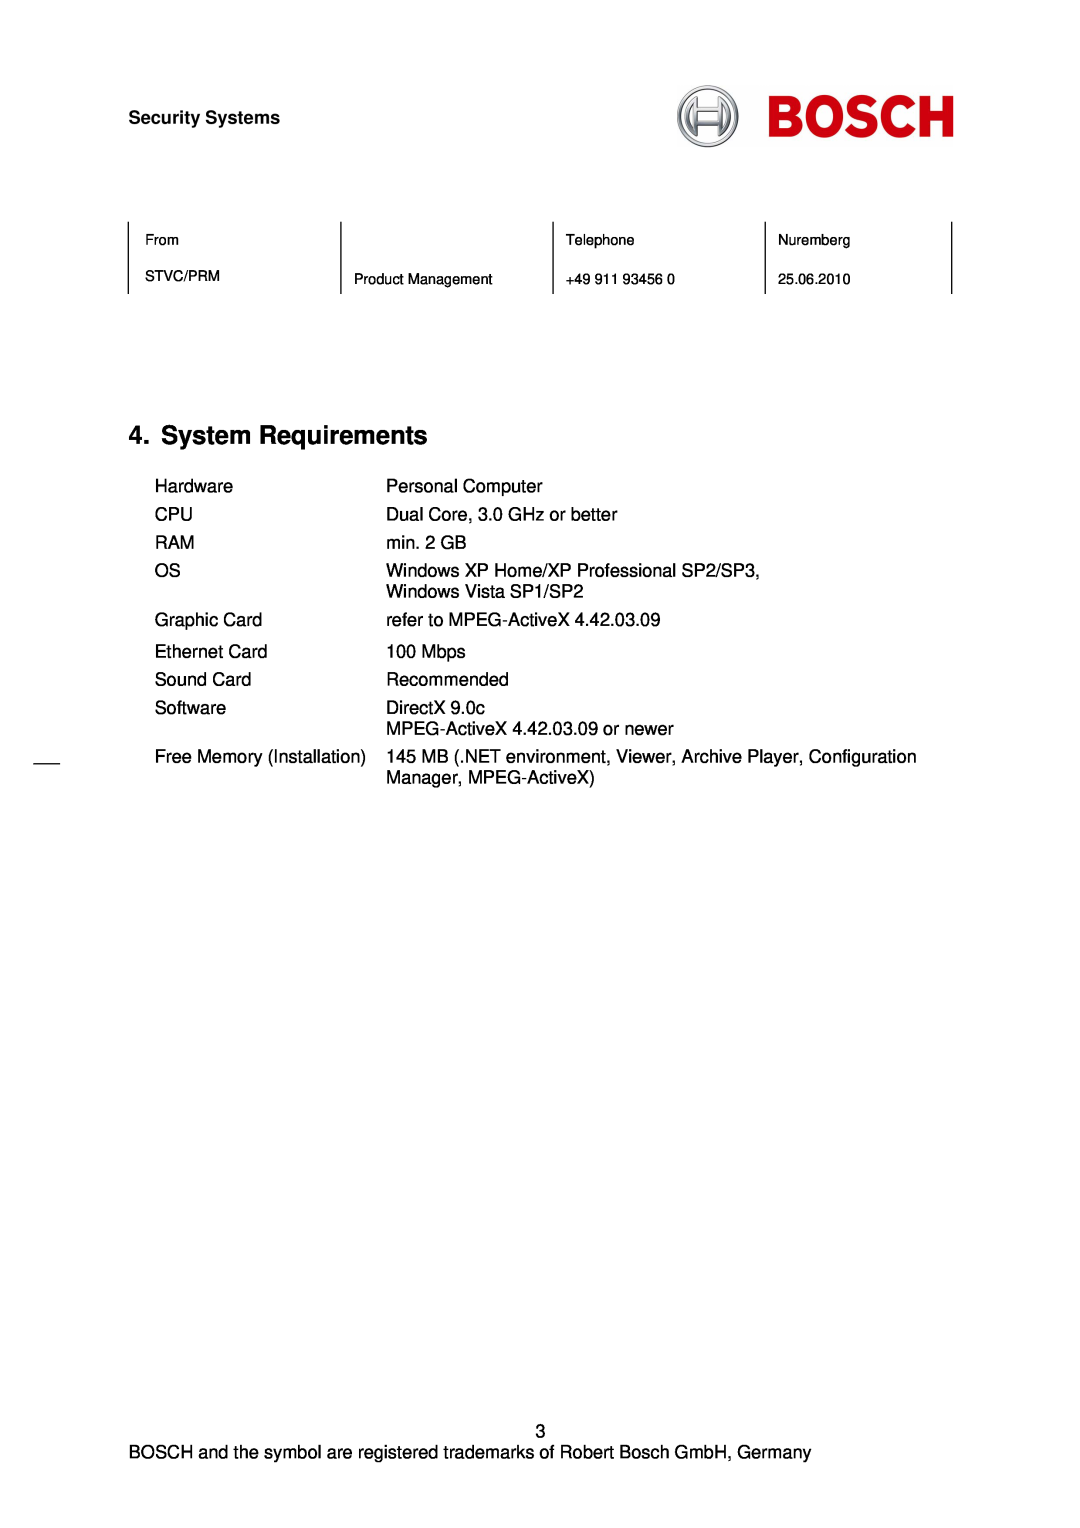 Bosch Appliances 3.21.0002 manual System Requirements, Security Systems 